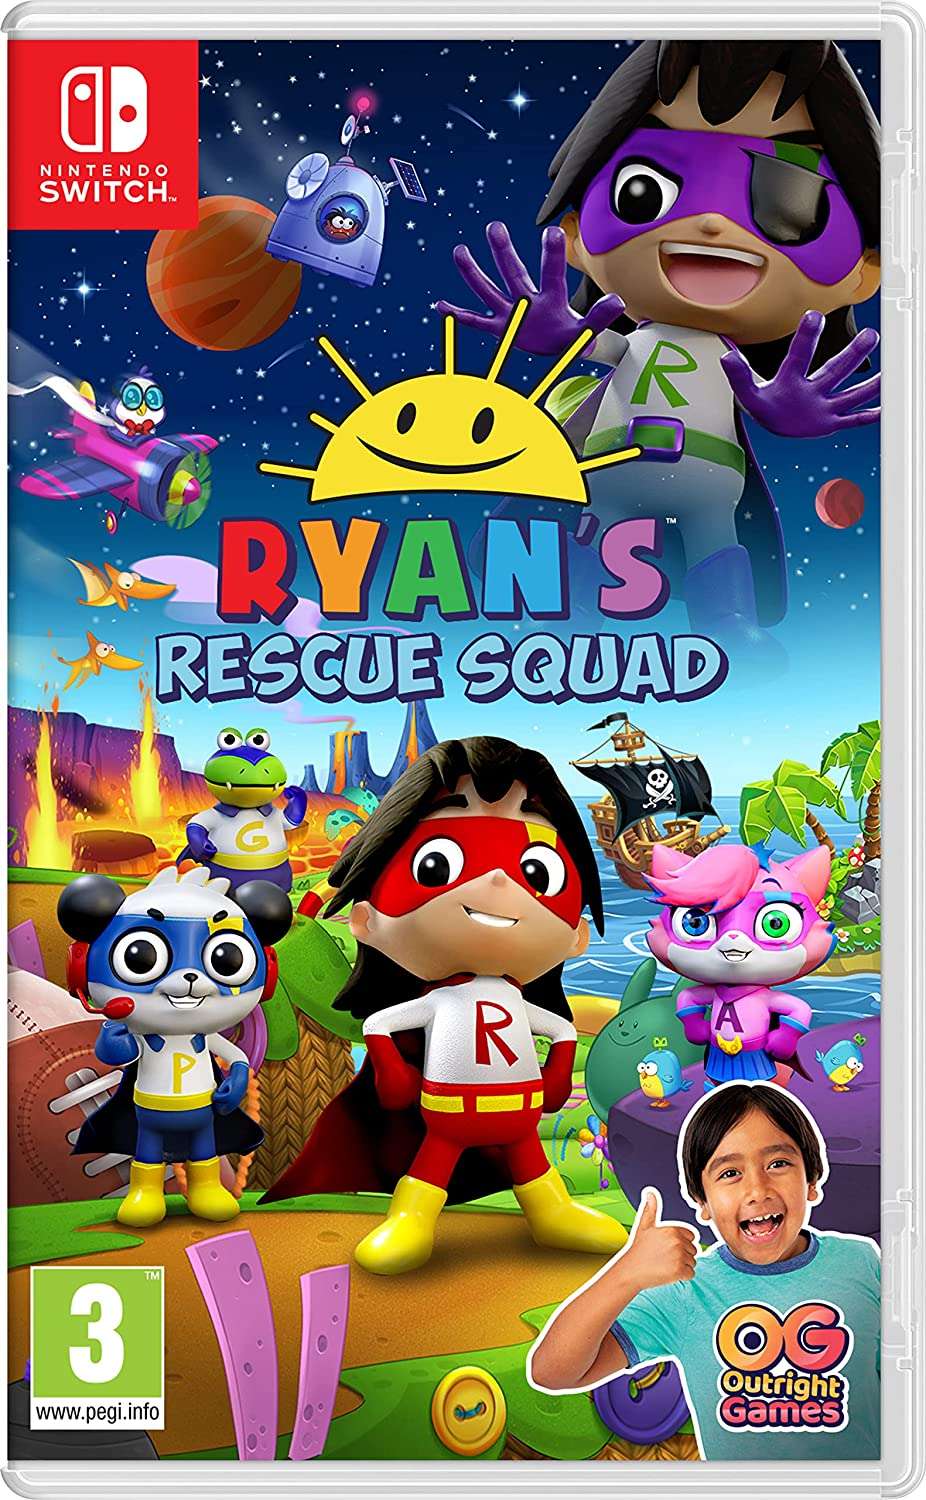 Ryans Rescue Squad for SWITCH to buy